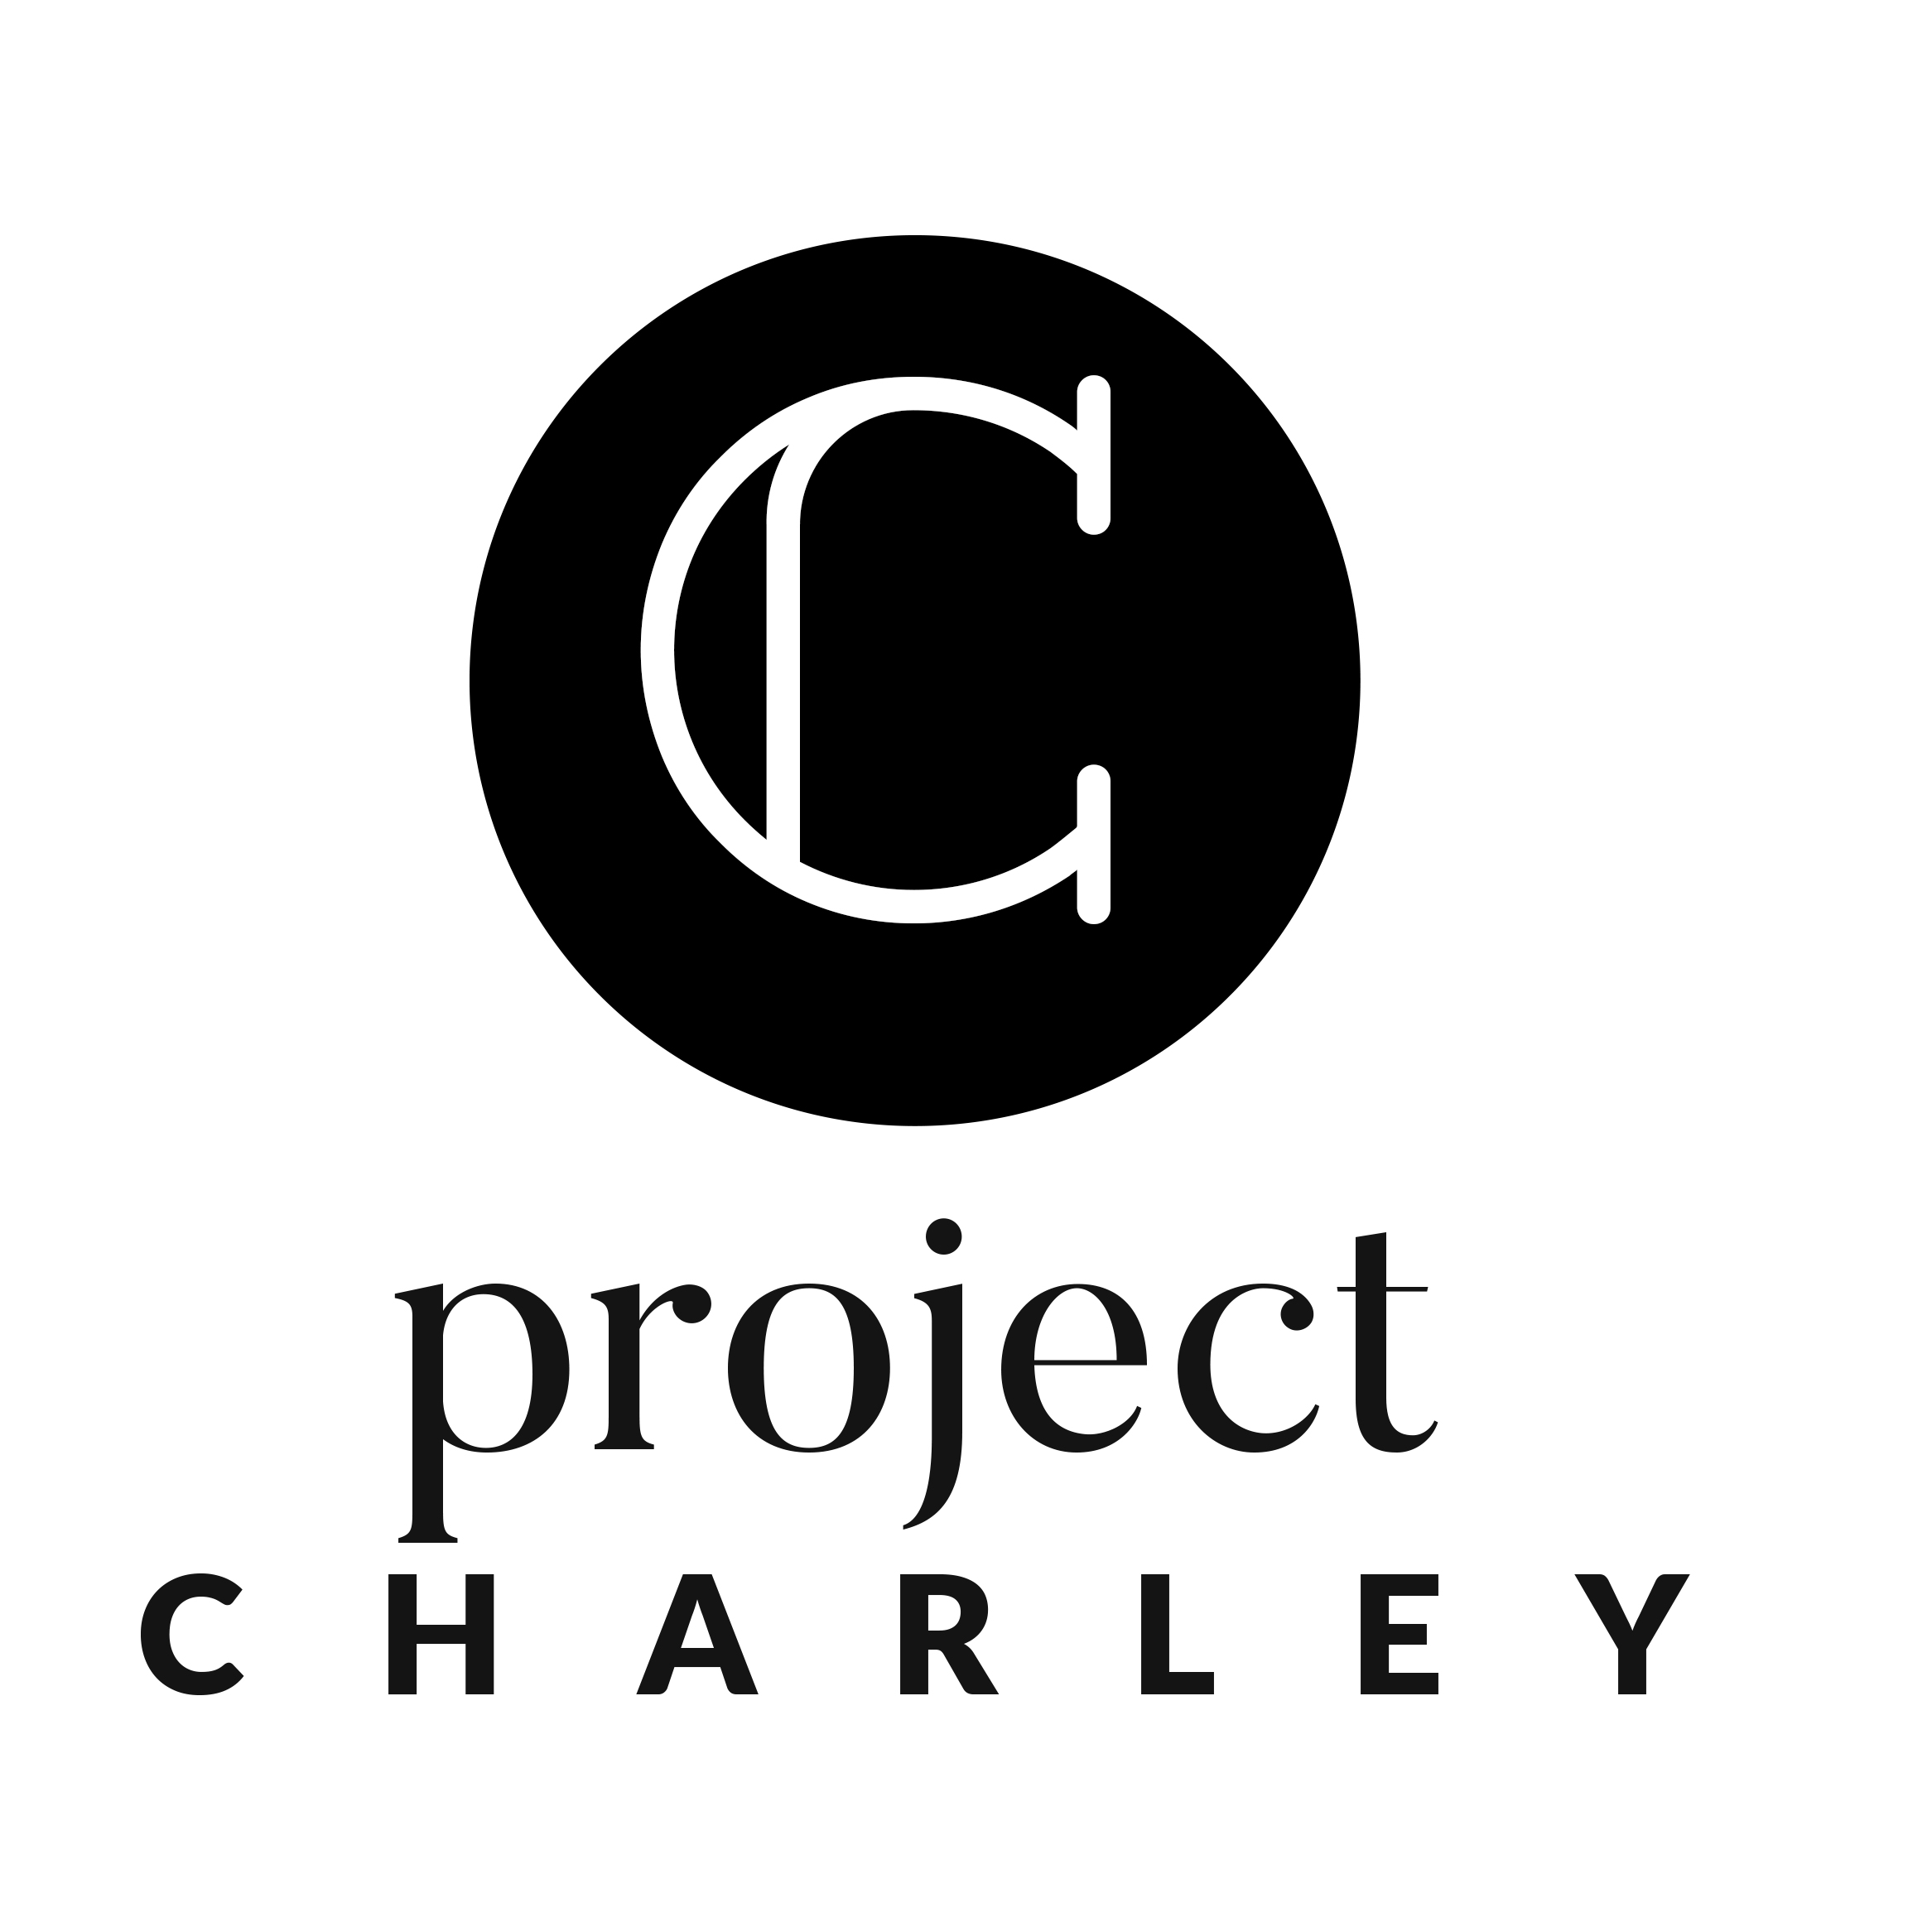 Project Charley logo